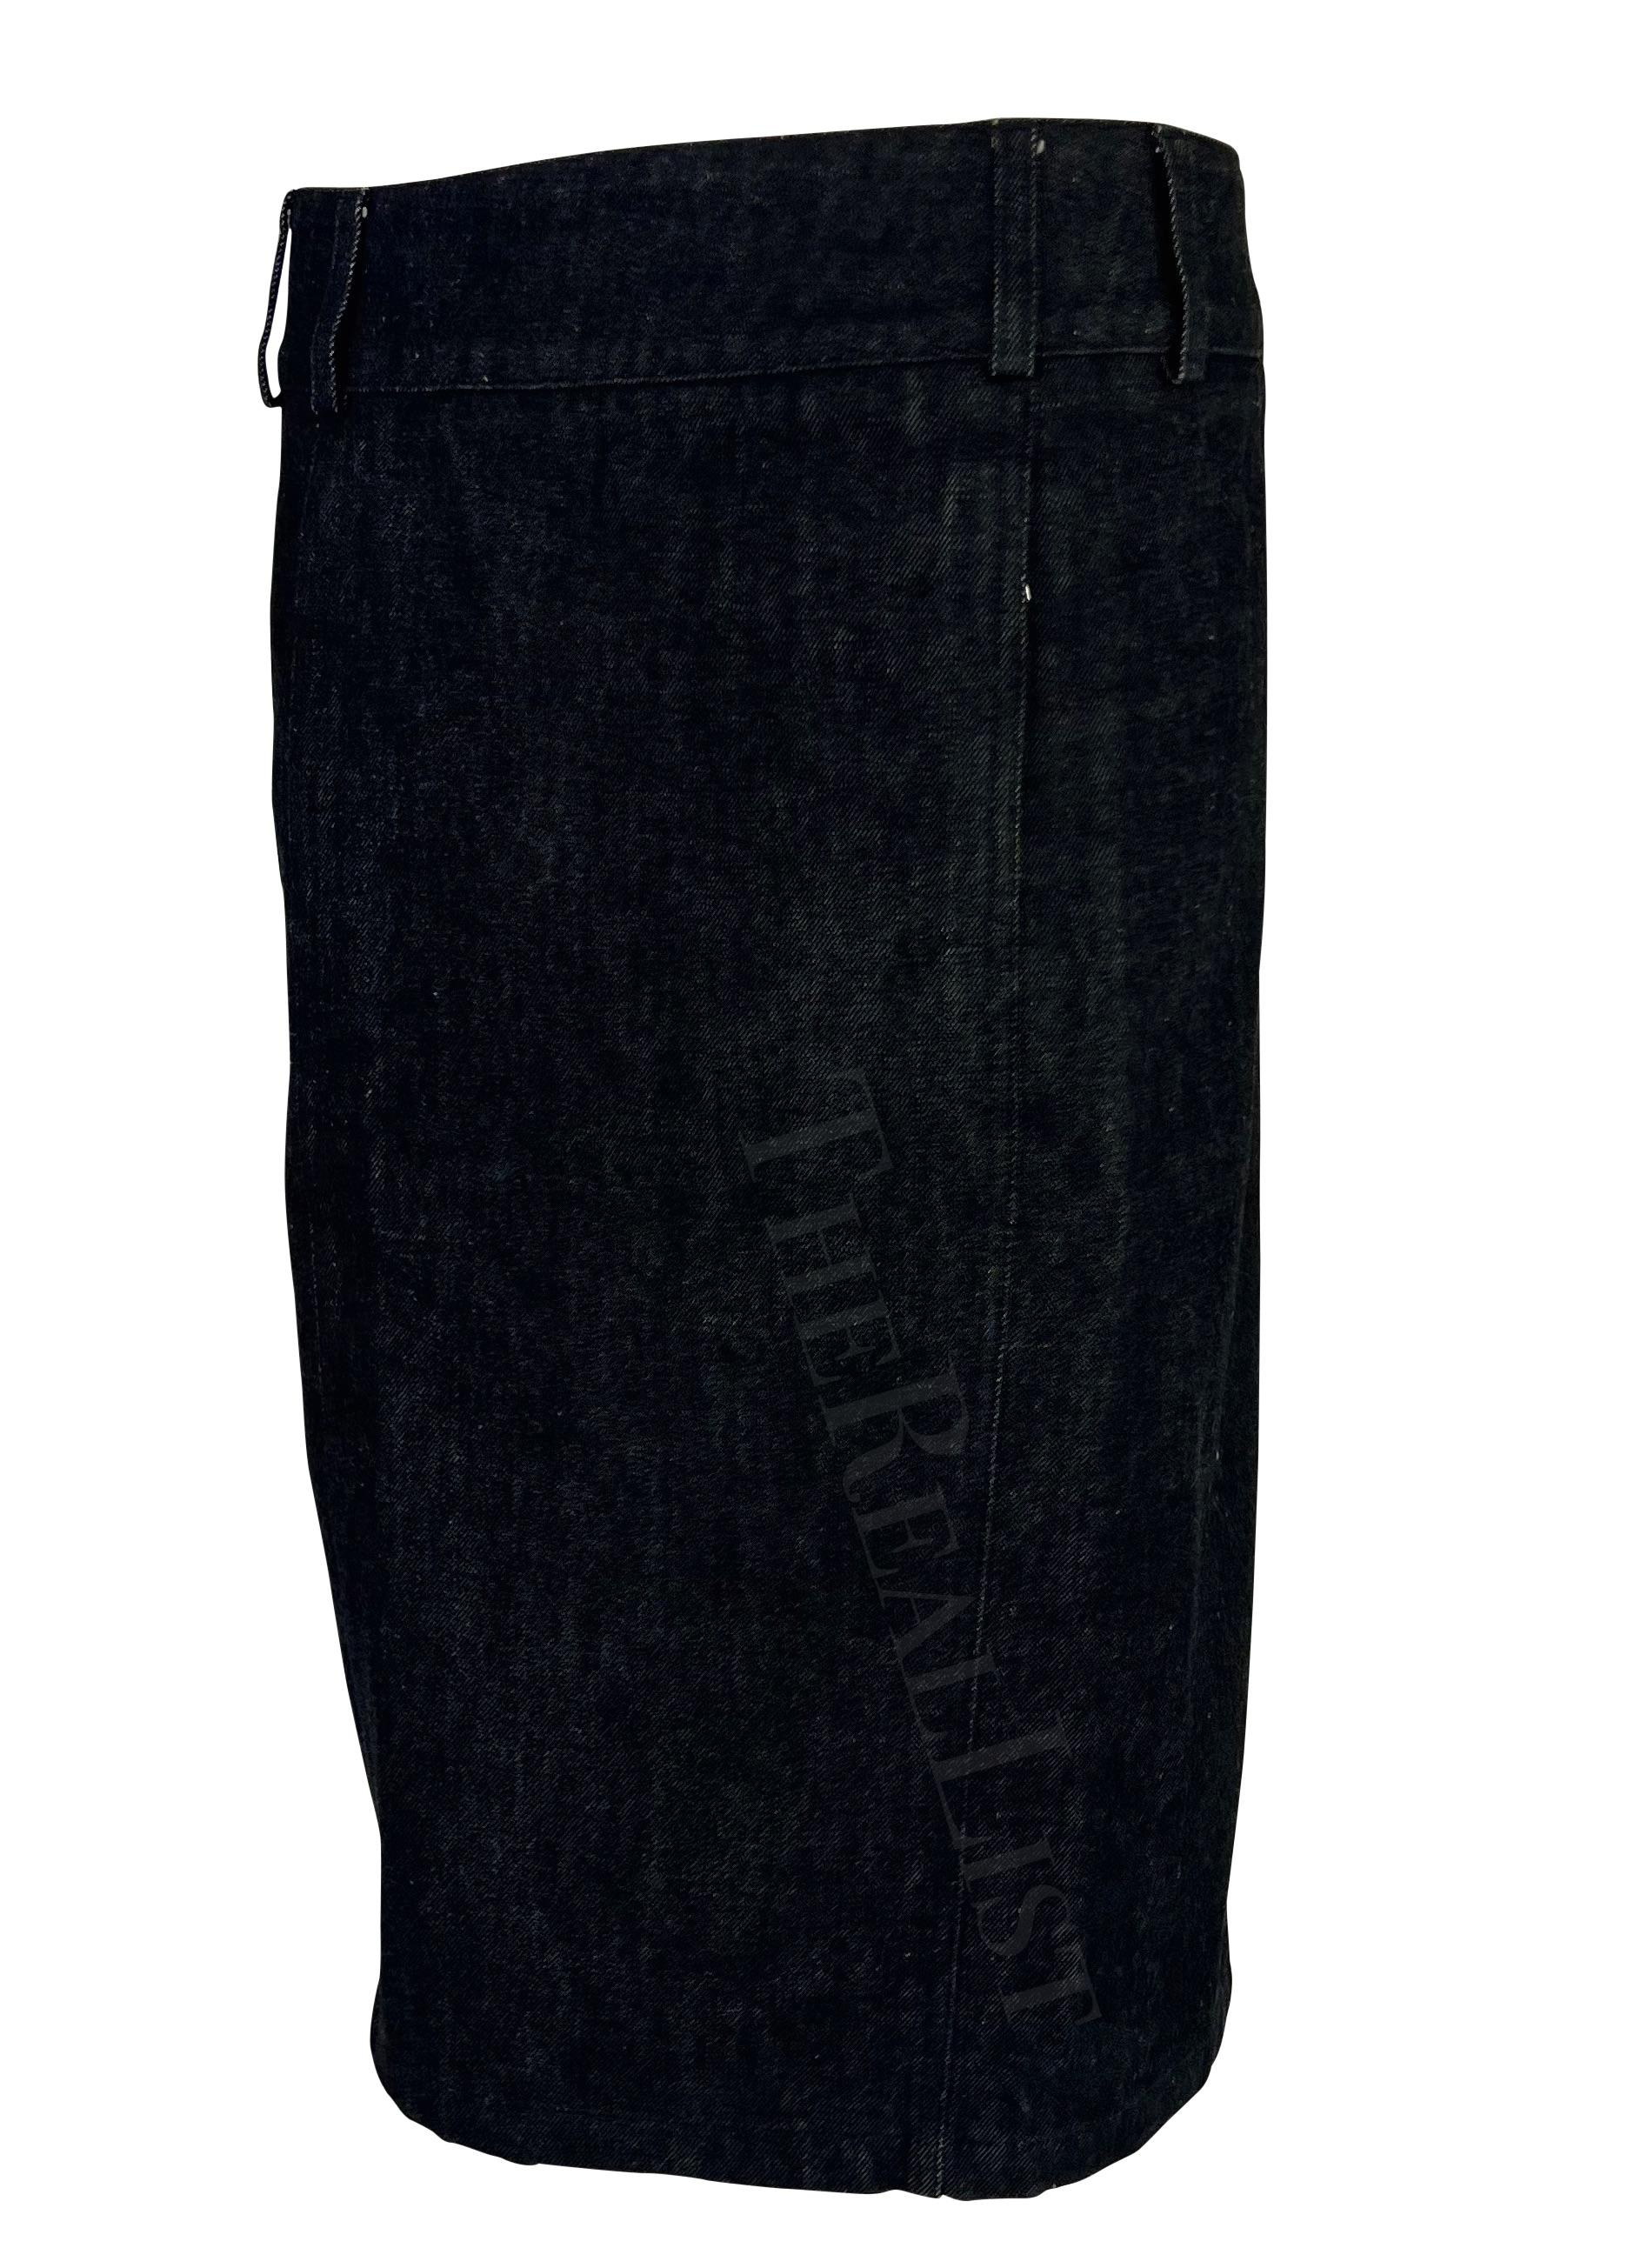 Presenting a dark Gucci denim pencil skirt, designed by Tom Ford. From 1999, this skirt features belt loops and is made complete with semi-hidden silver tone zippers. A closet staple, this Gucci by Tom Ford skirt is the perfect elevated take on a